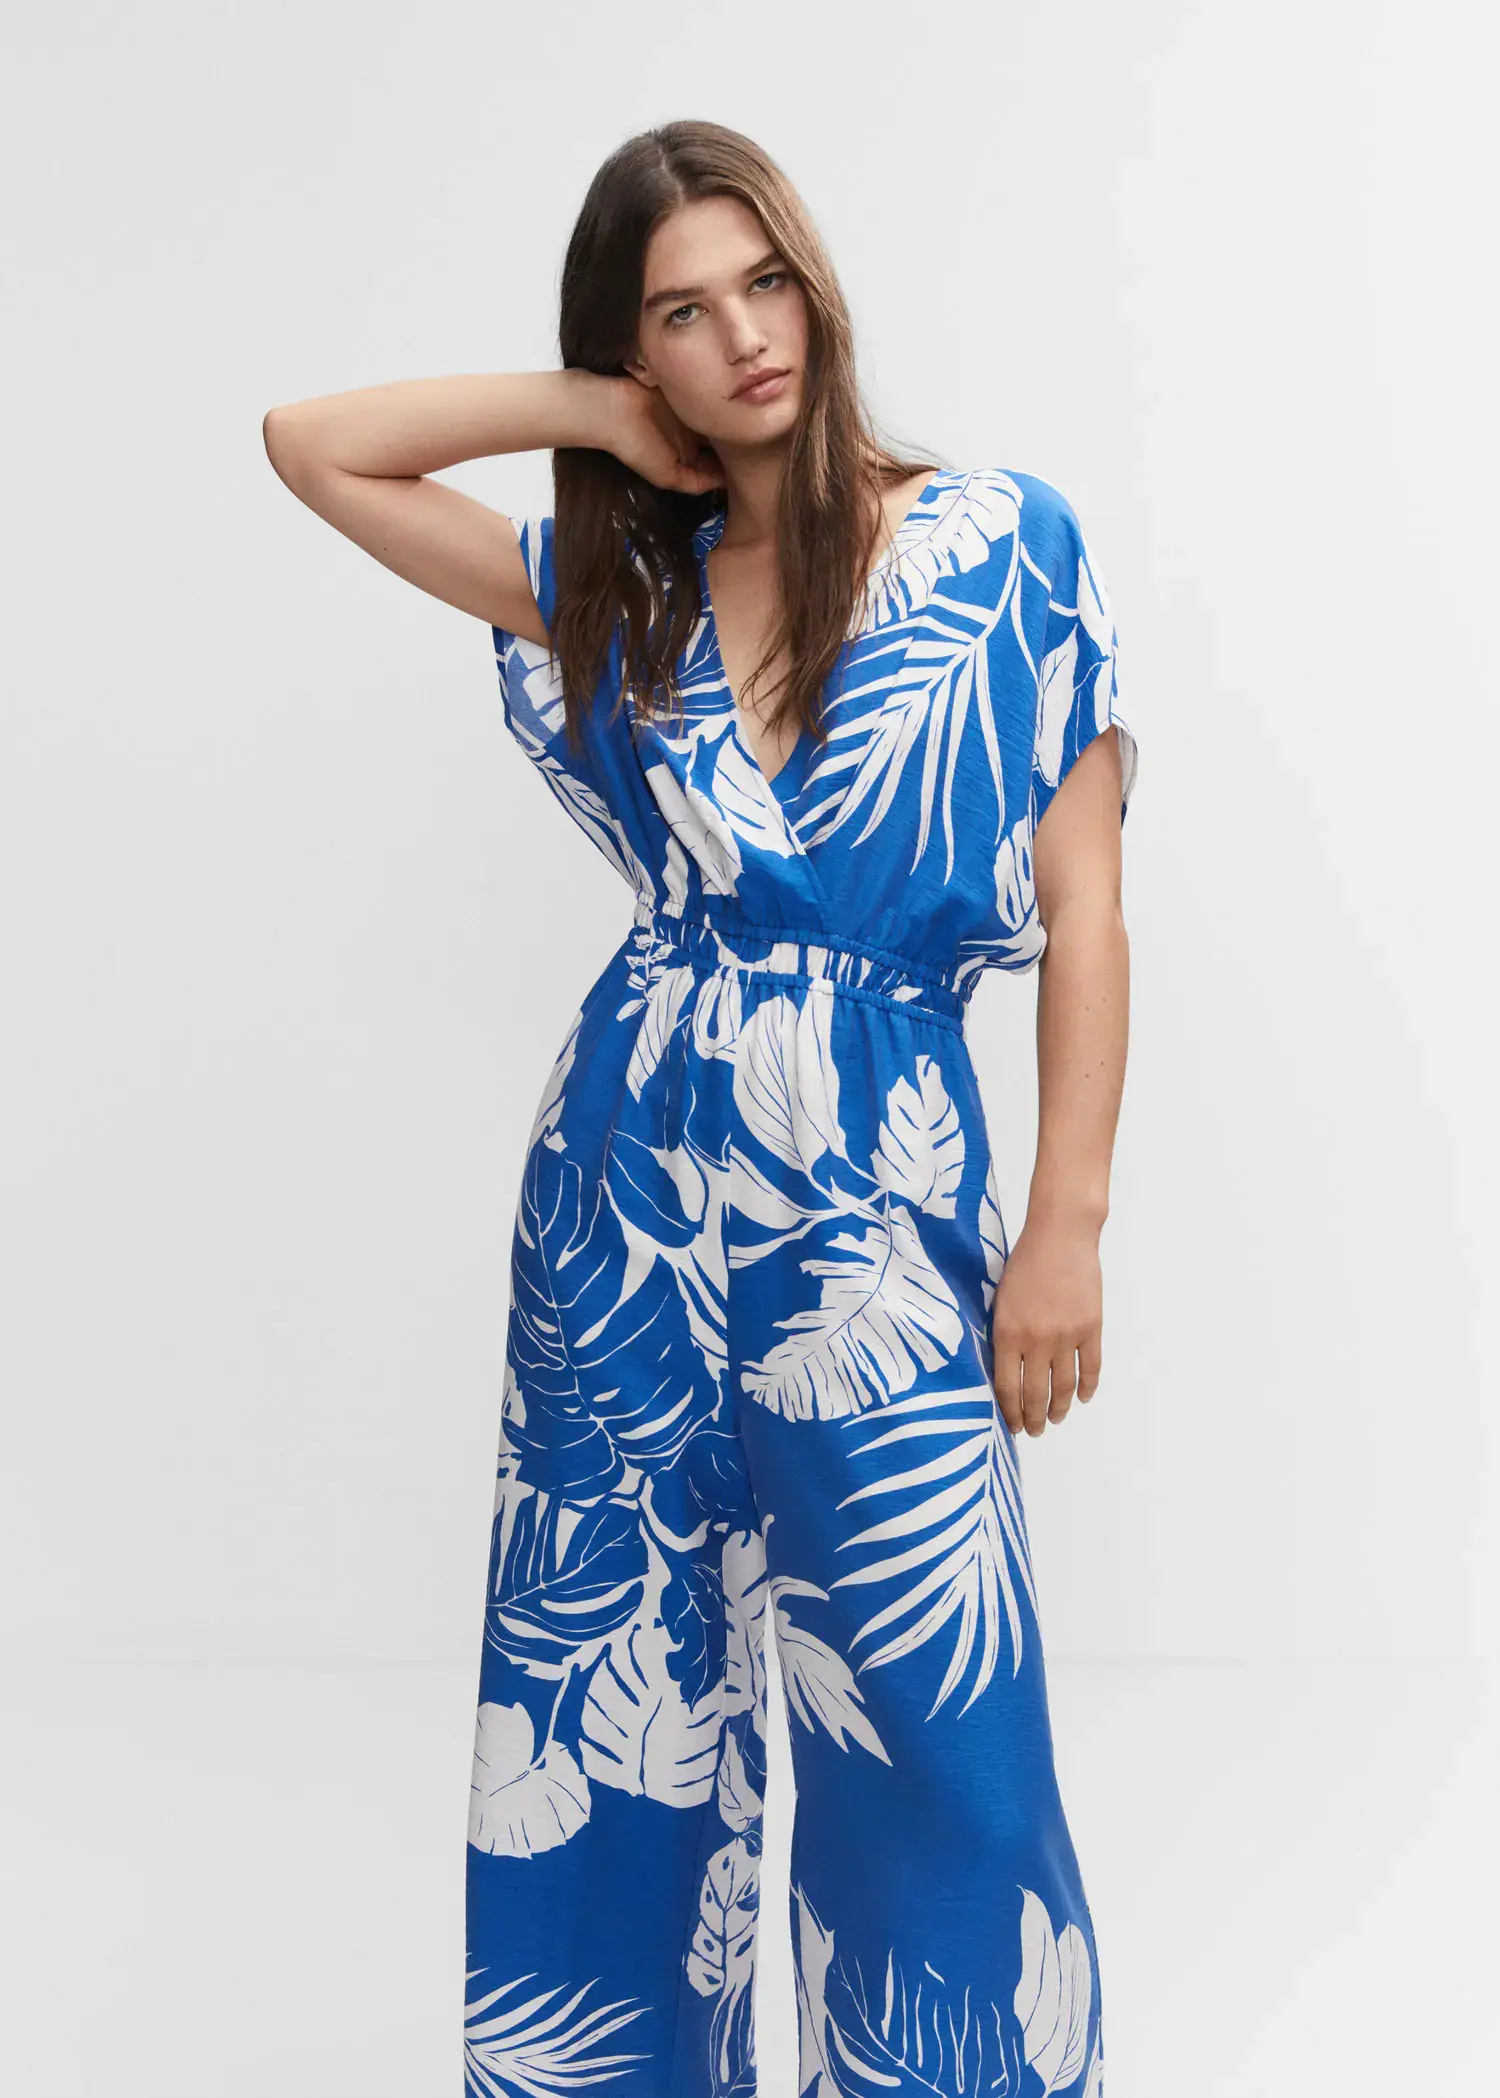 Mango Tropical print jumpsuit. a woman in a blue and white floral dress. 